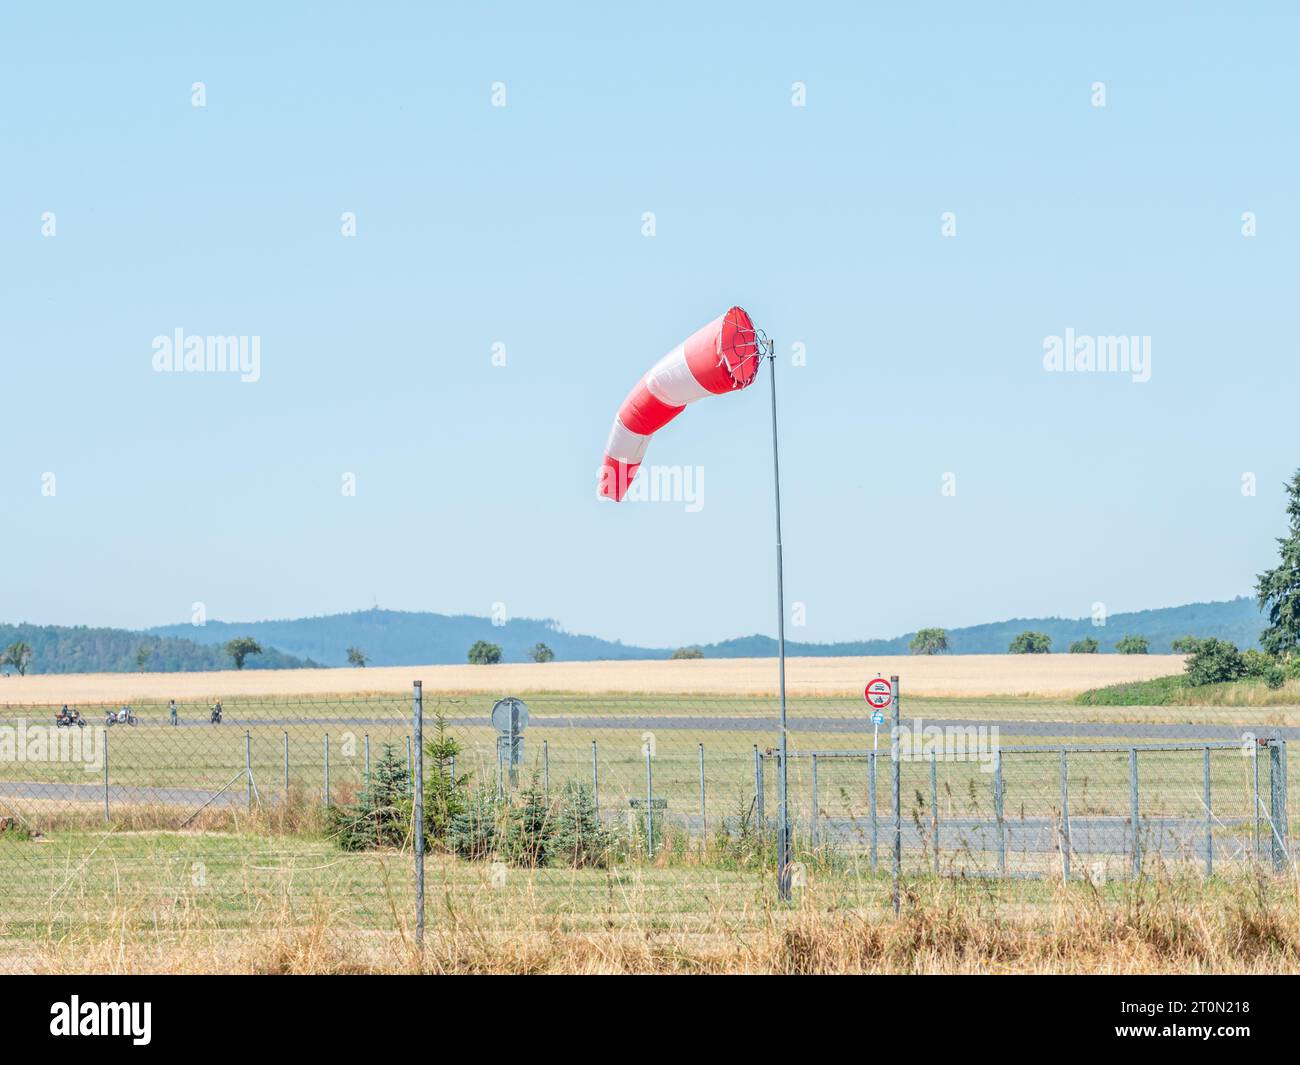 Summer hot day on sport airport with abandoned windsock, wind is blowing and windsock is moving Stock Photo